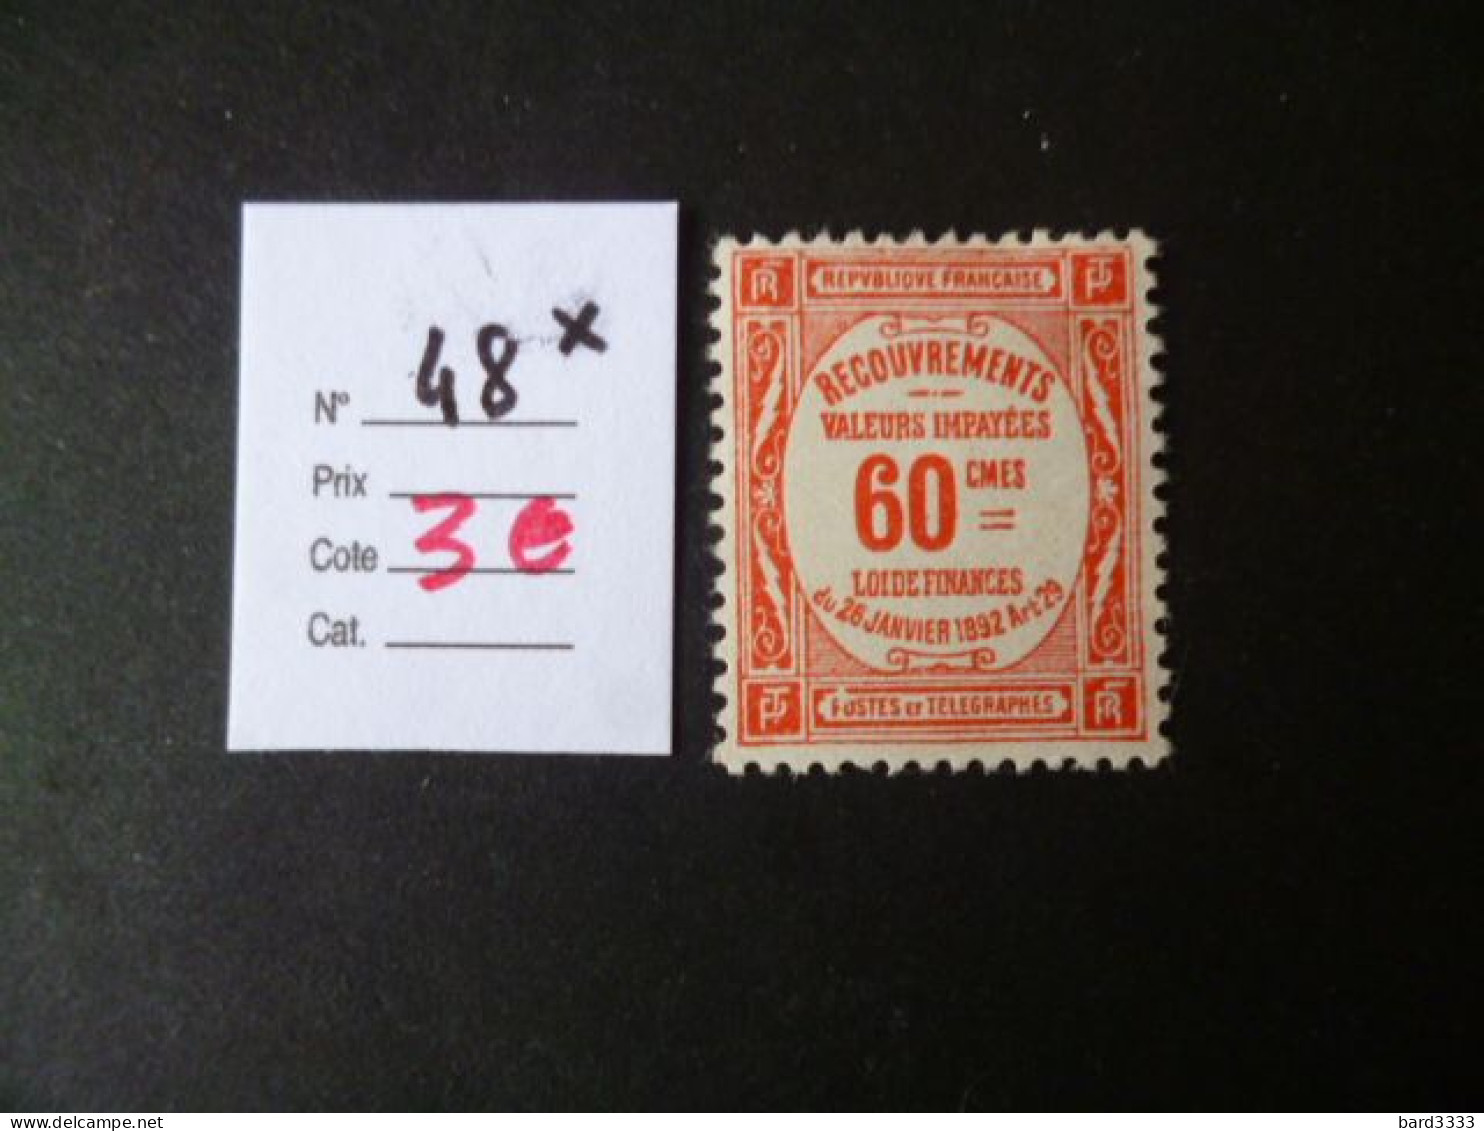 Timbre France Neuf * Taxe N° 48 Cote 3 € - 1859-1959 Mint/hinged